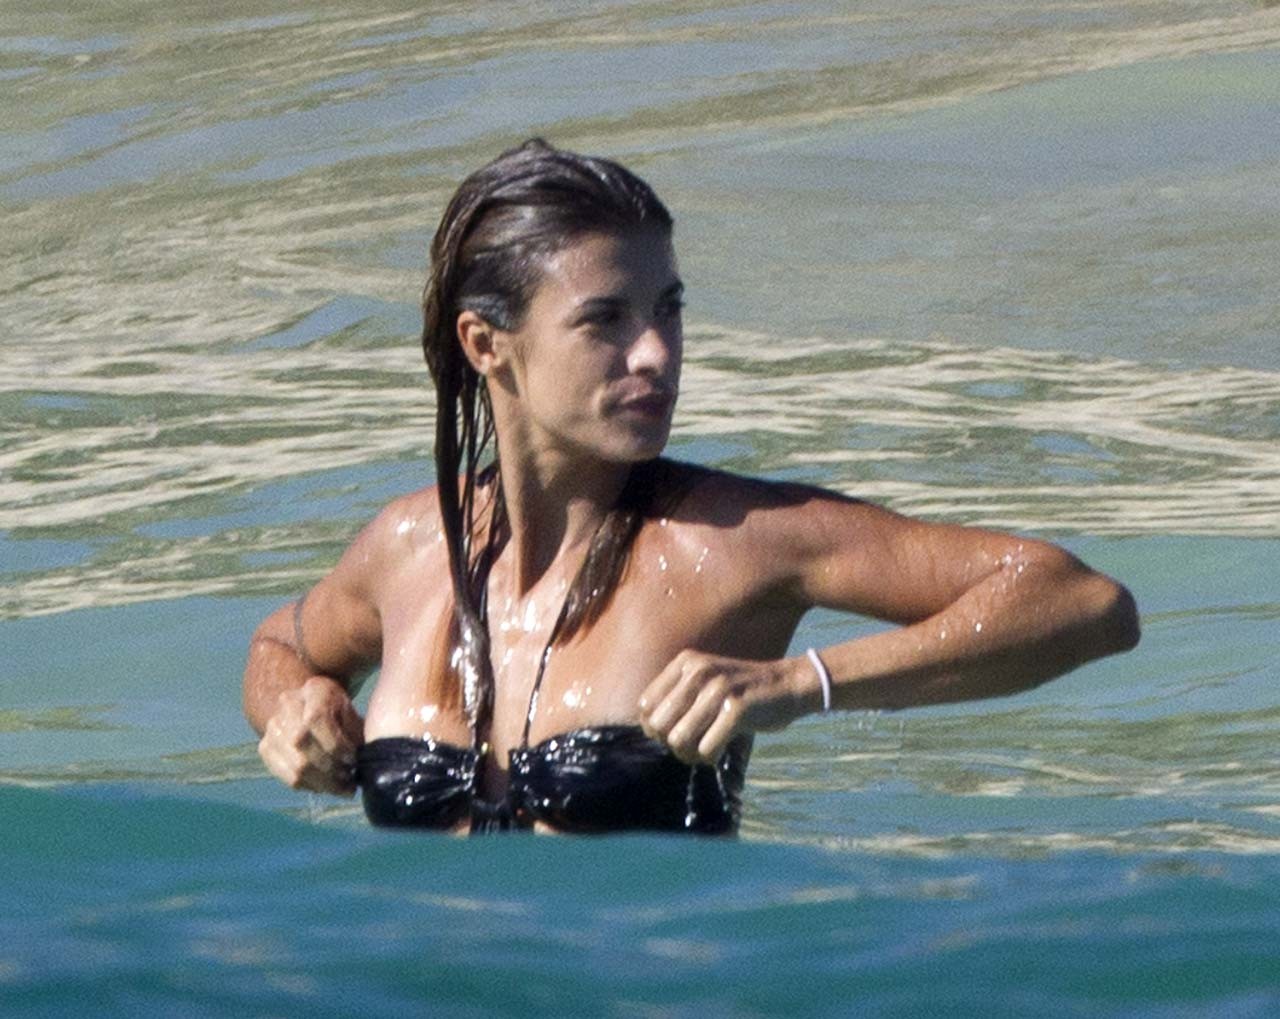 Elisabetta Canalis showing her great body and ass in bikini and nipple slip #75320145